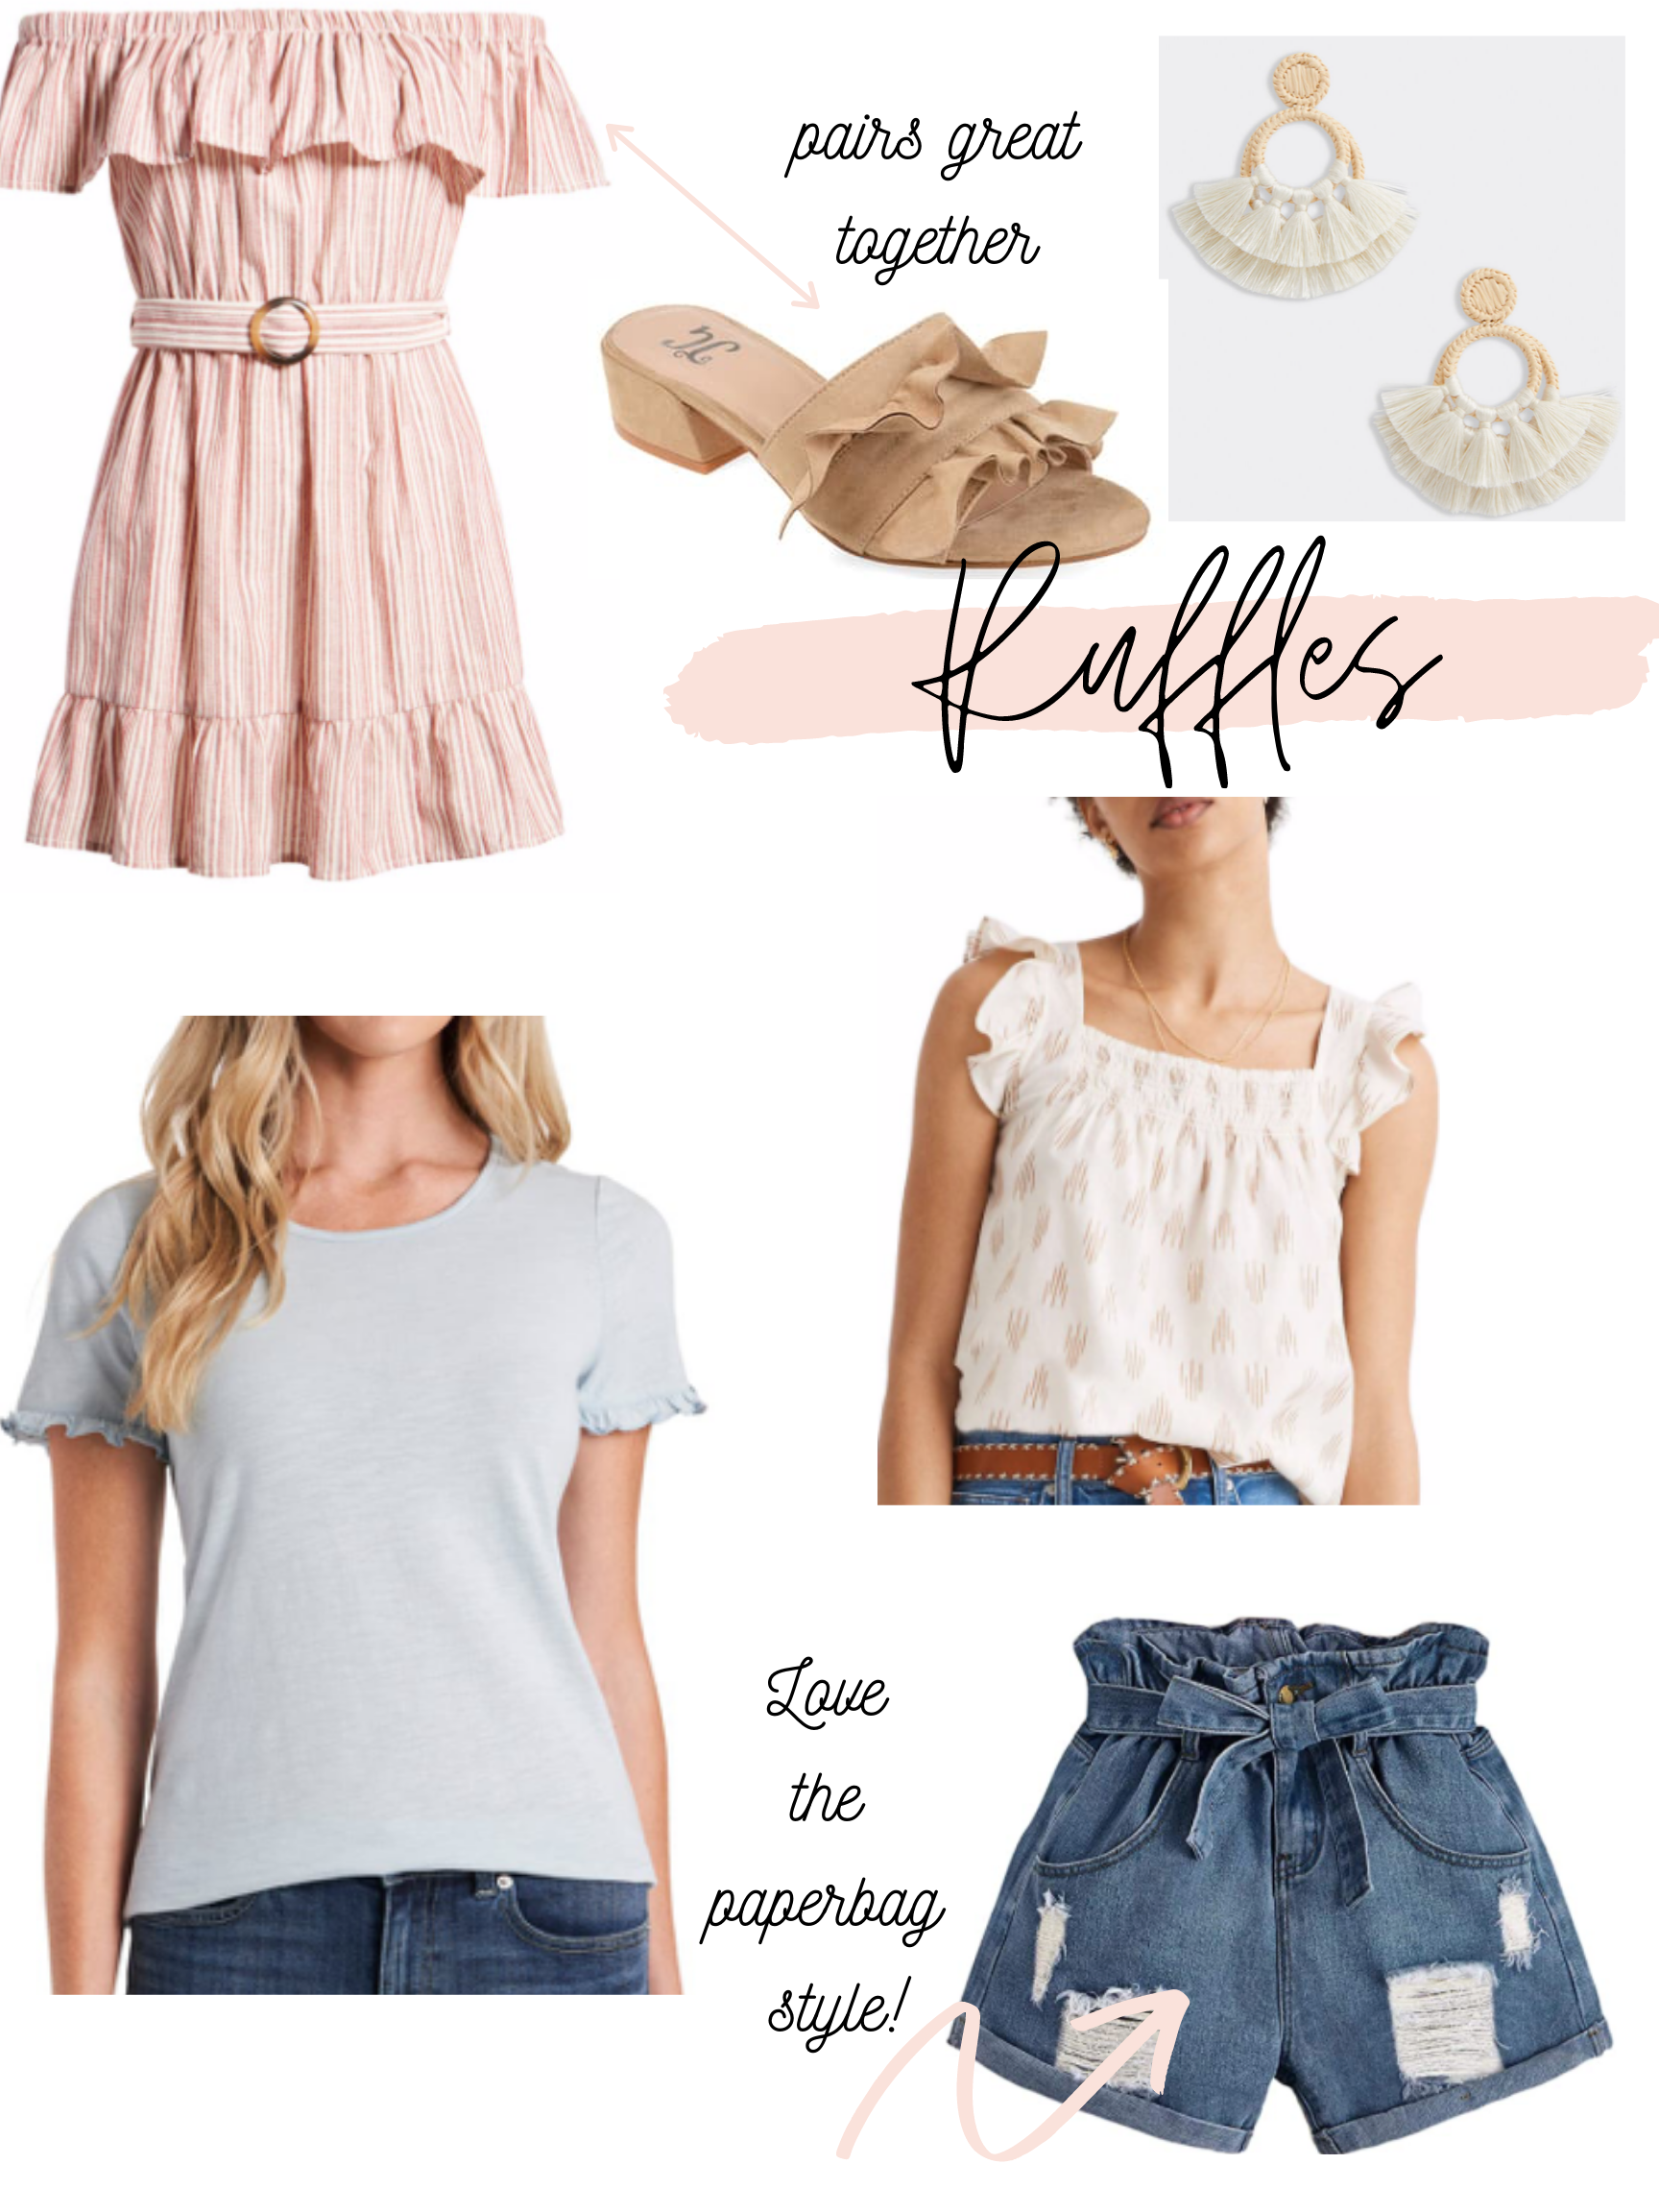 Elevate Your Spring Style With Ruffles!